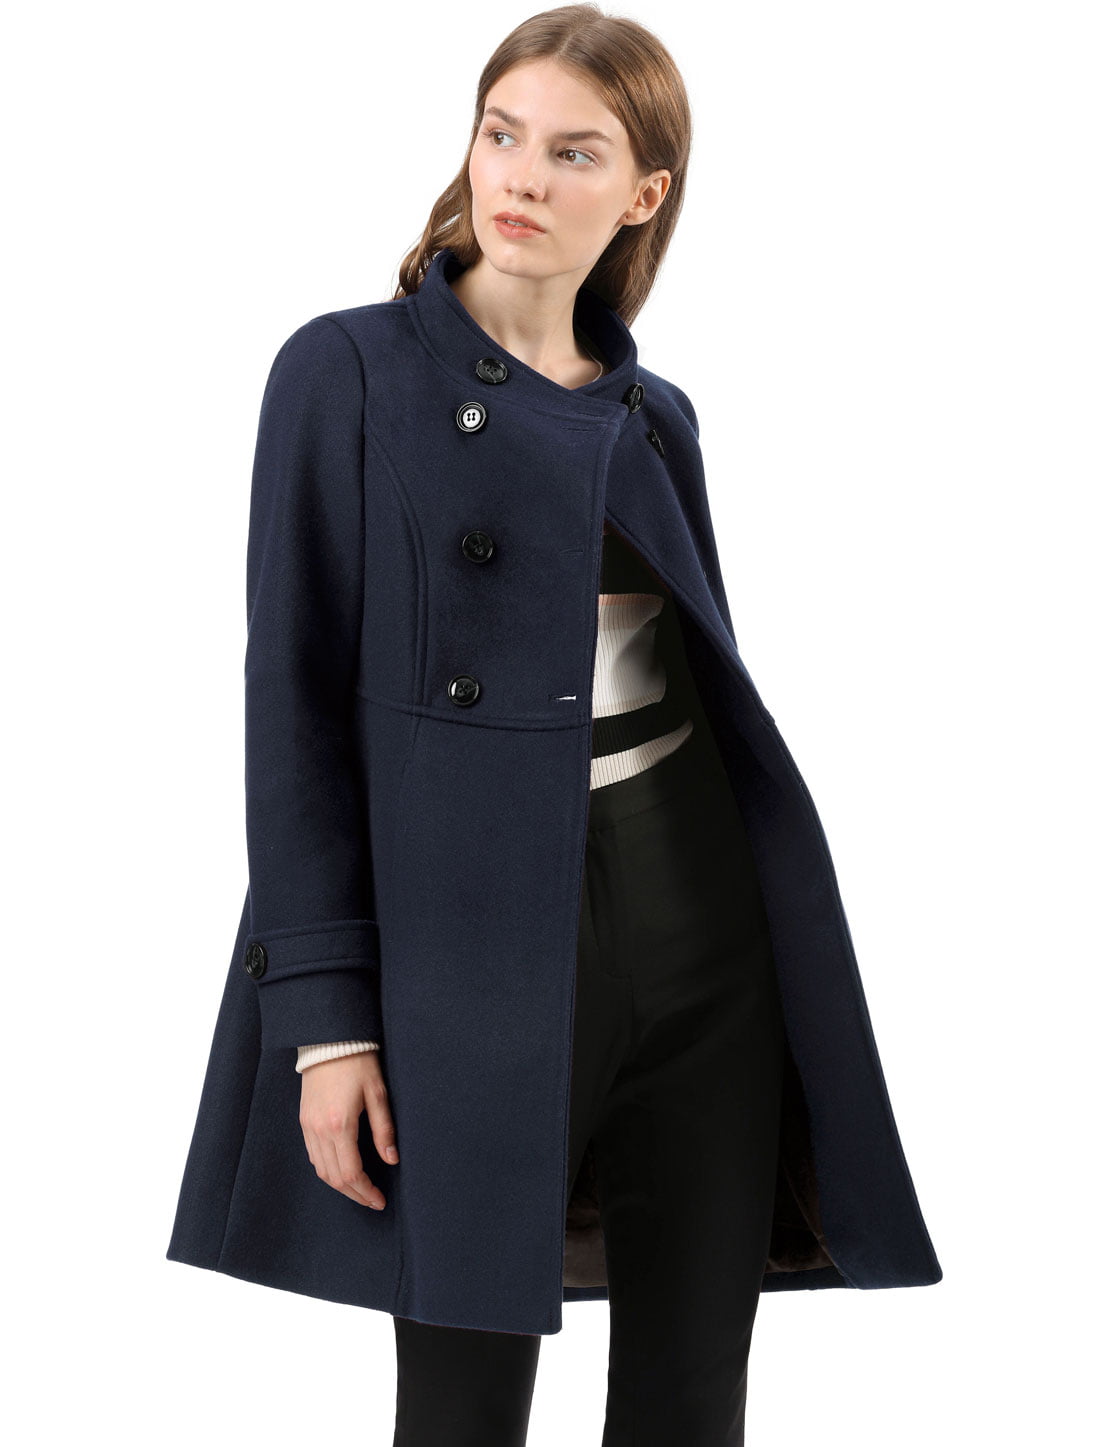 Women's Stand Collar Double Breasted Outwear Winter Coat Dark Blue L ...